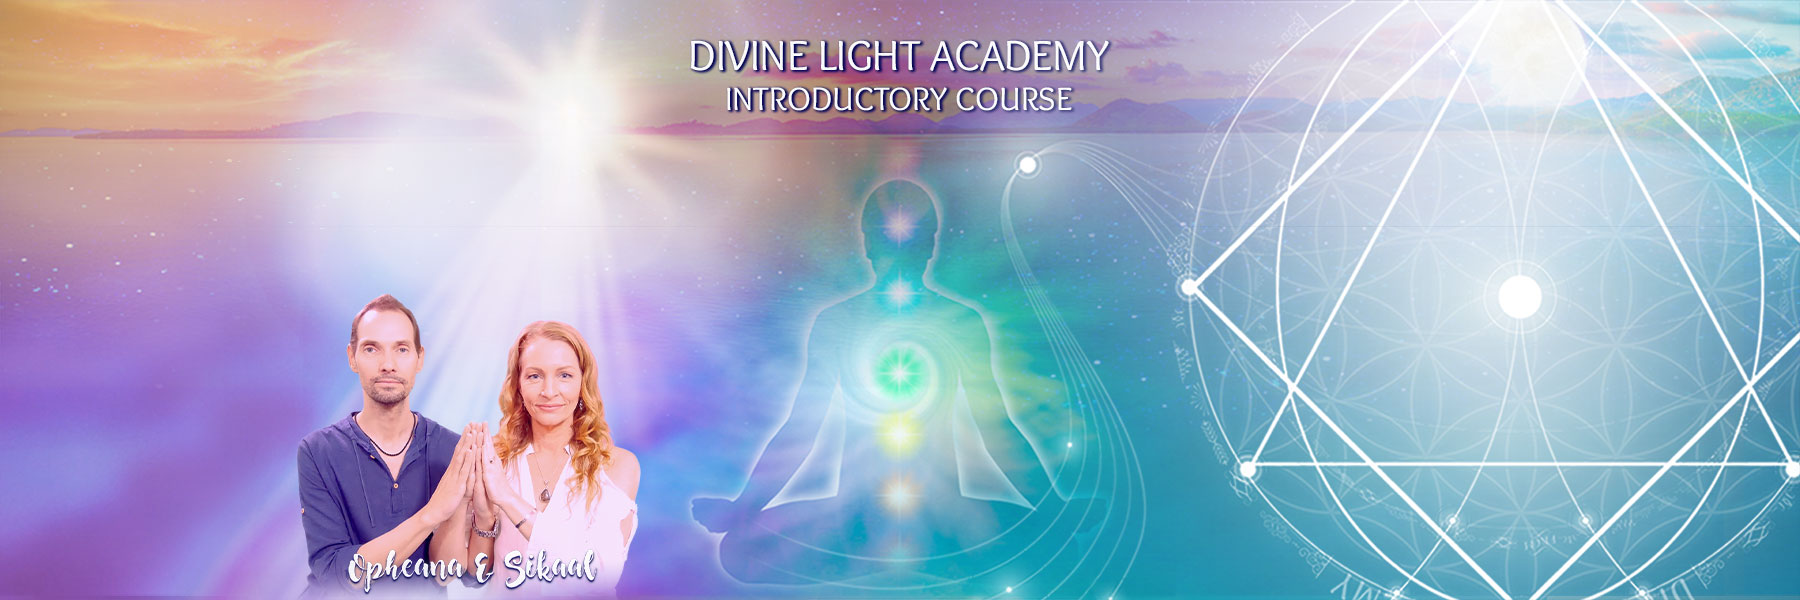 Divine Light Academy Introductory Course